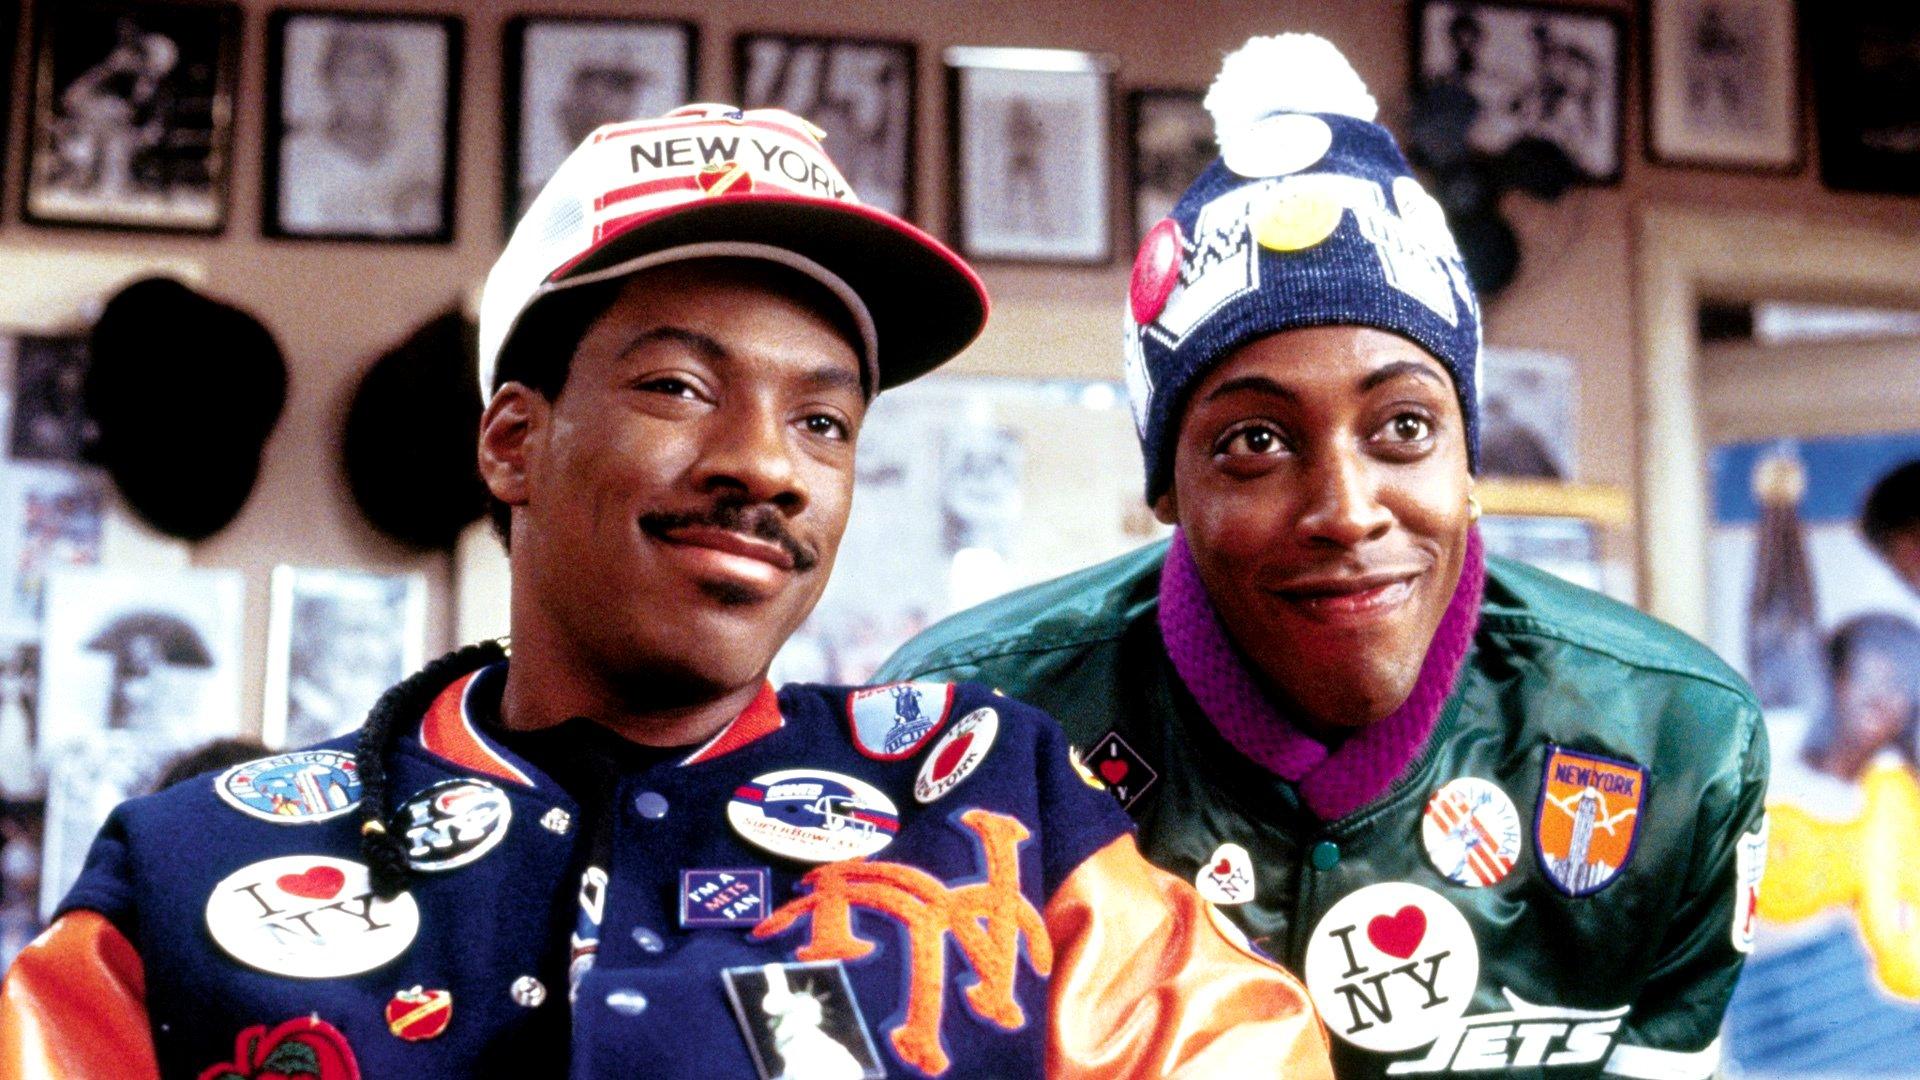 Coming to America HD Wallpaper. Background Image